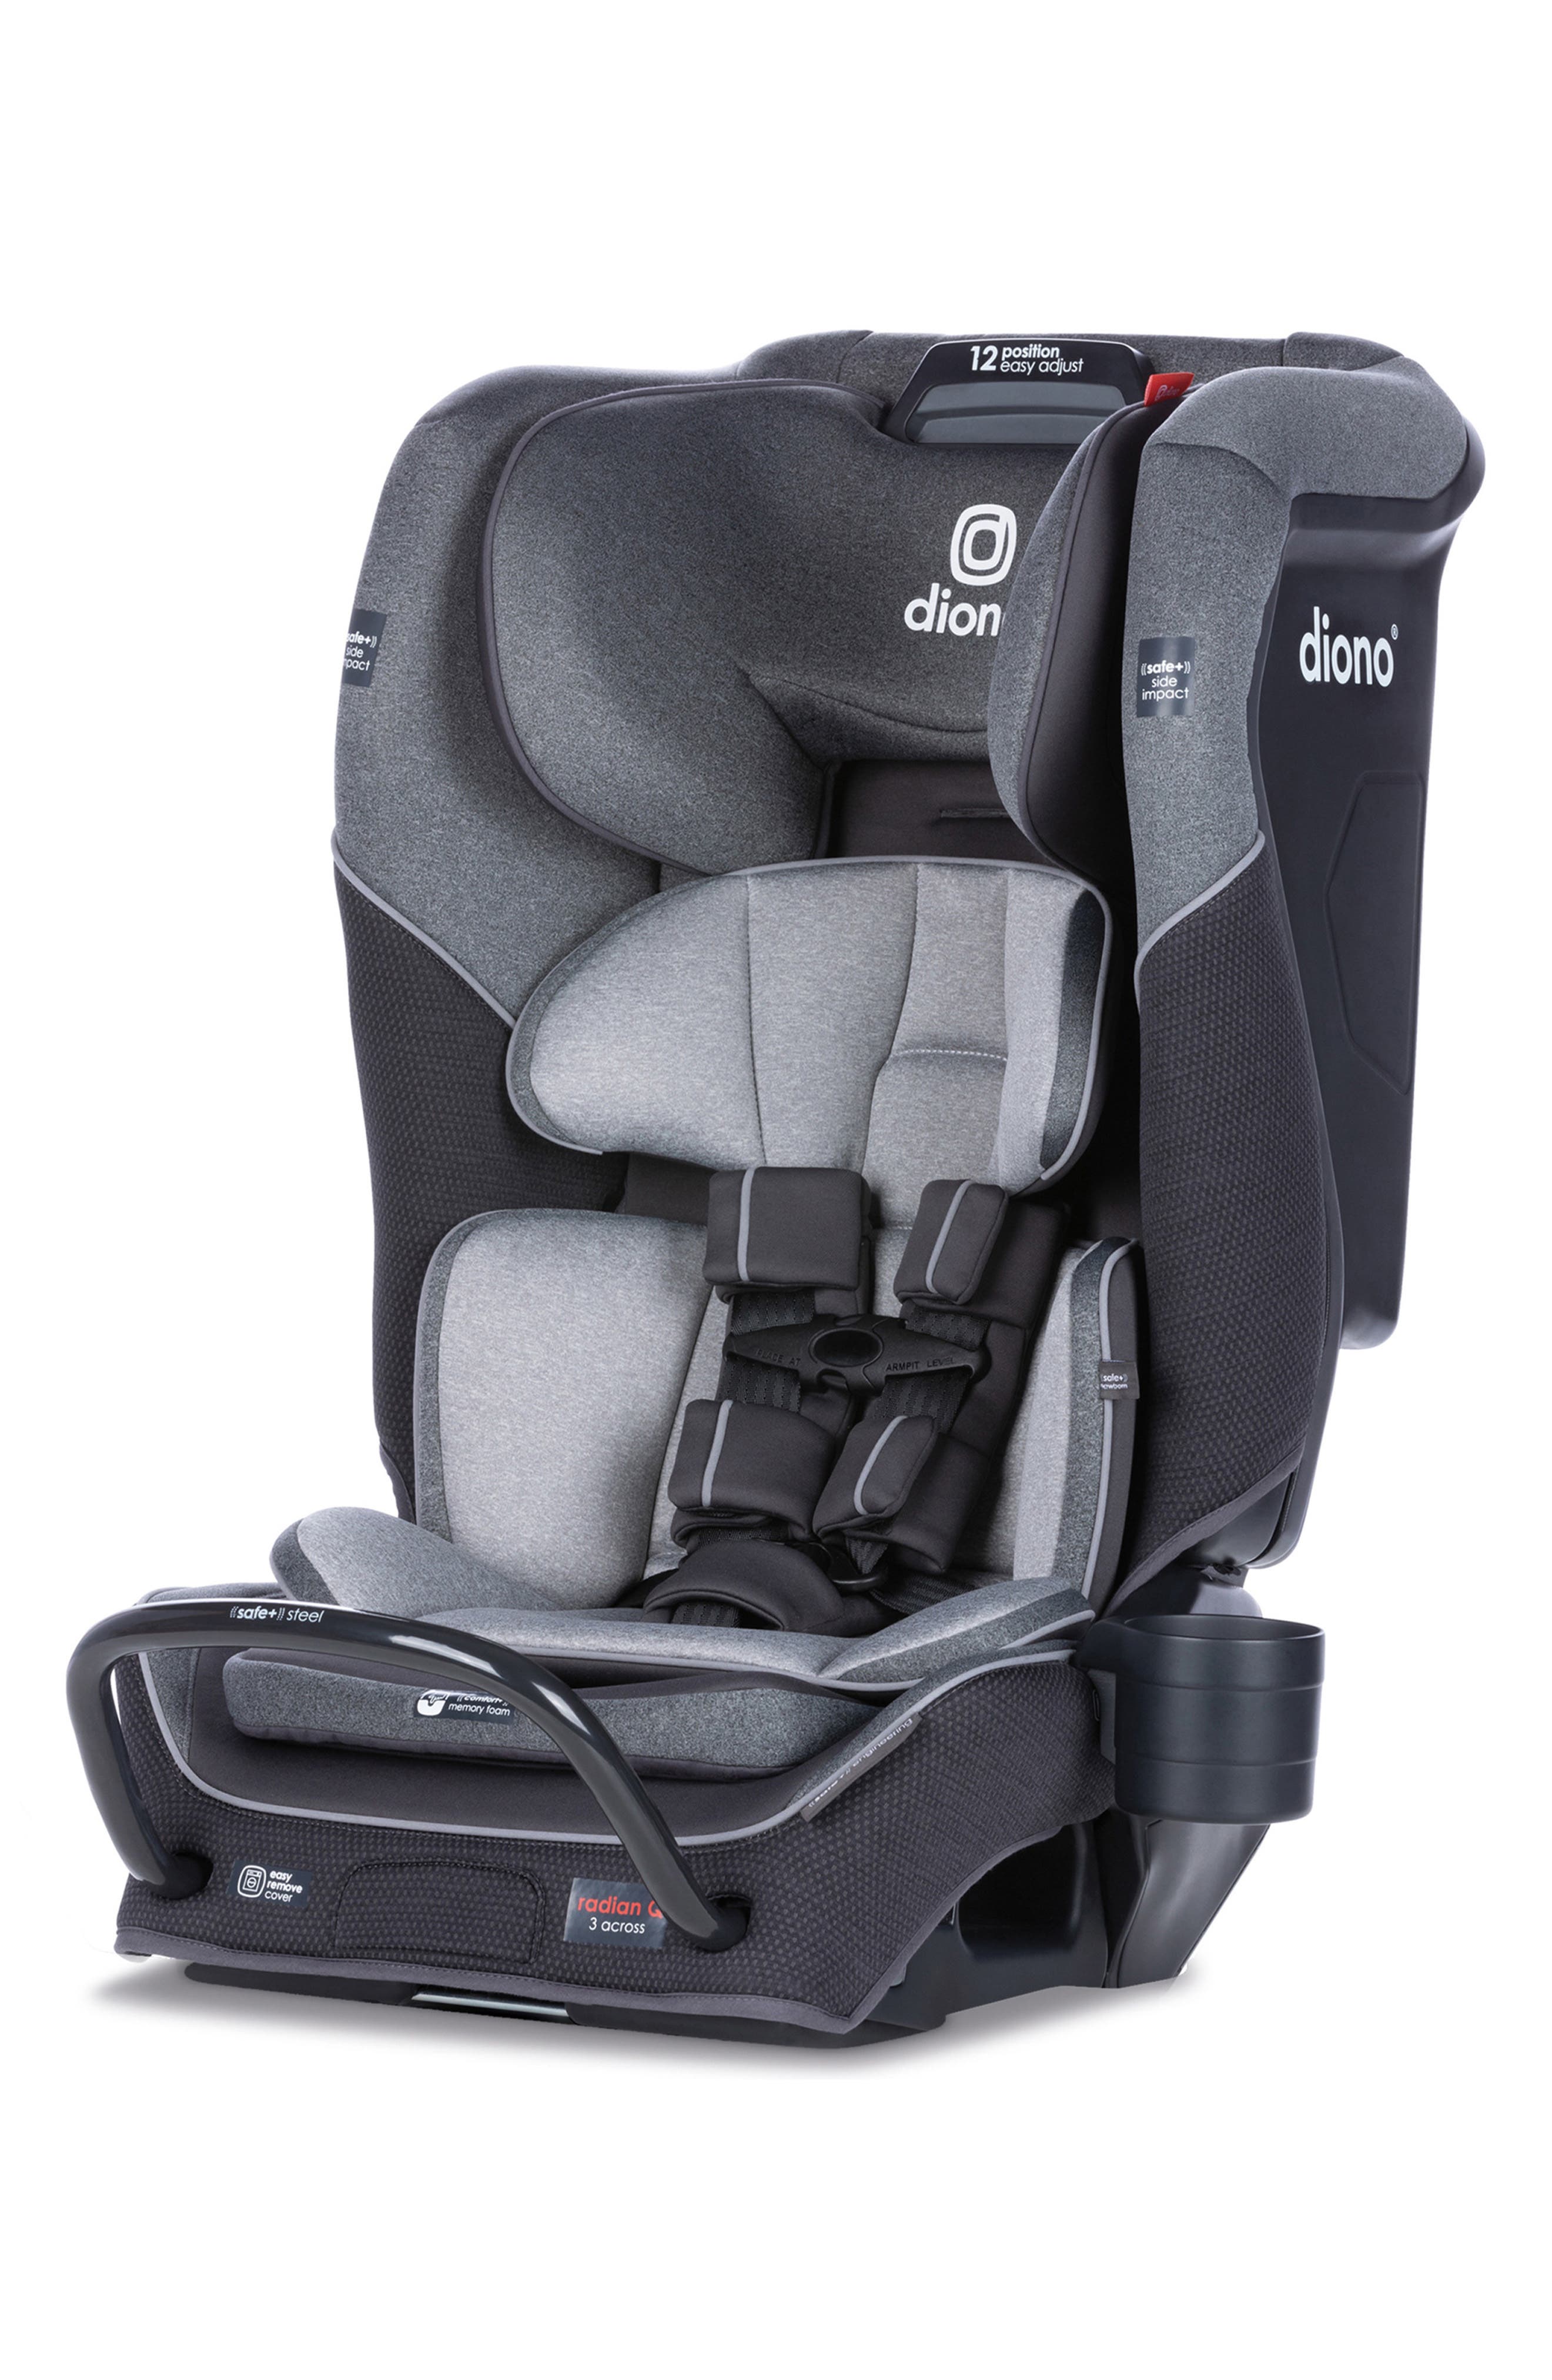 Diono radian(R) 3QX All-in-One Convertible Car Seat in Gray Slate